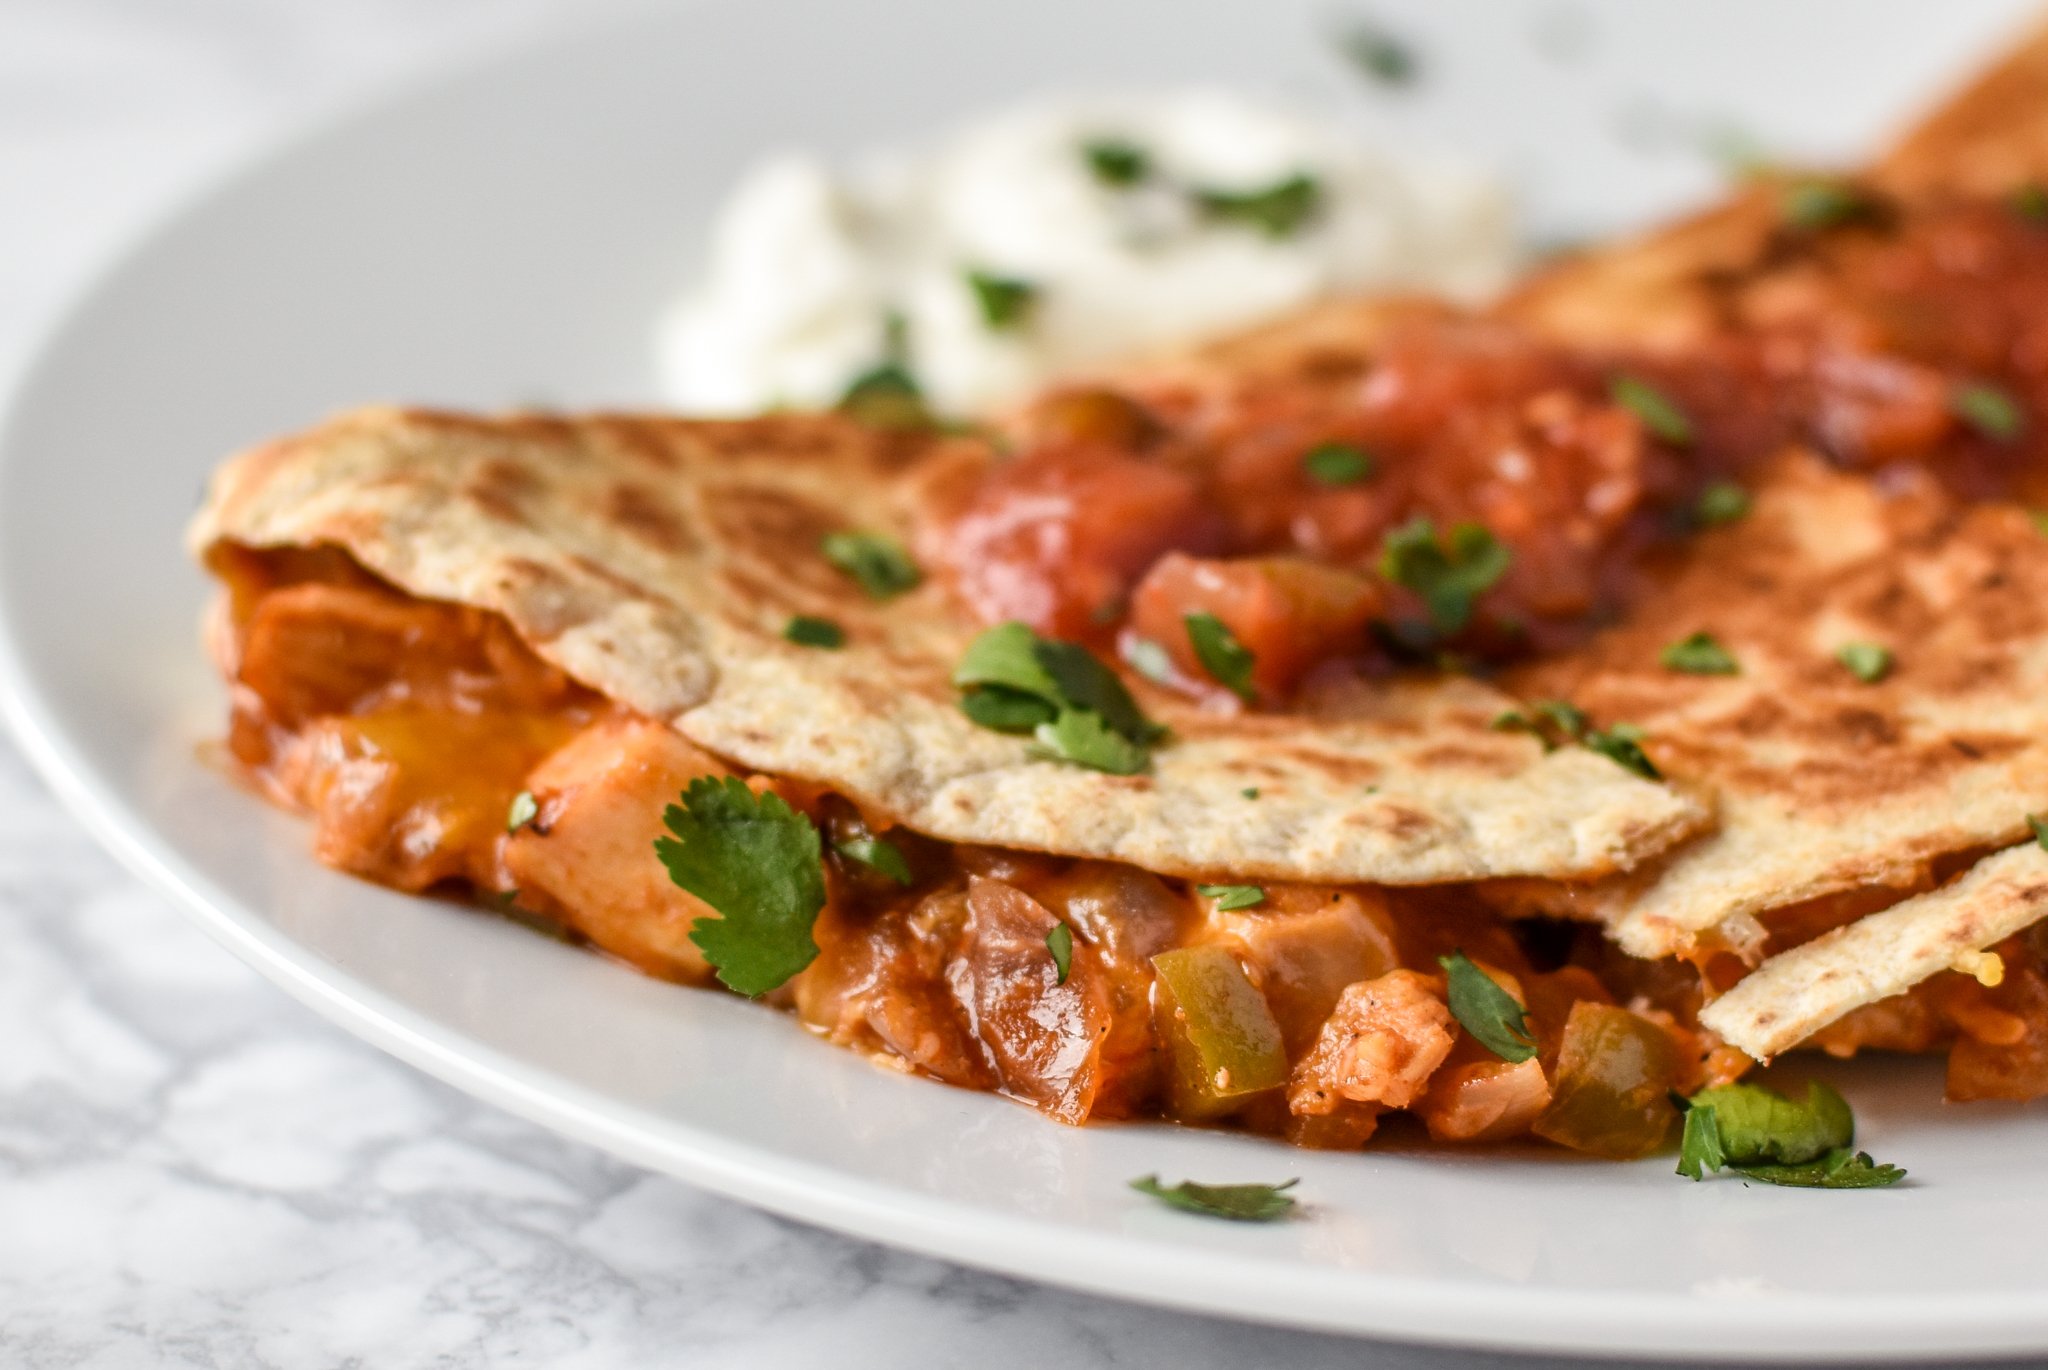 Quick BBQ Chicken Quesadillas (Make-Ahead Filling Recipe) - Delicious BBQ chicken quesadillas made in 10 minutes with pre-made filling! - ProjectMealPlan.com